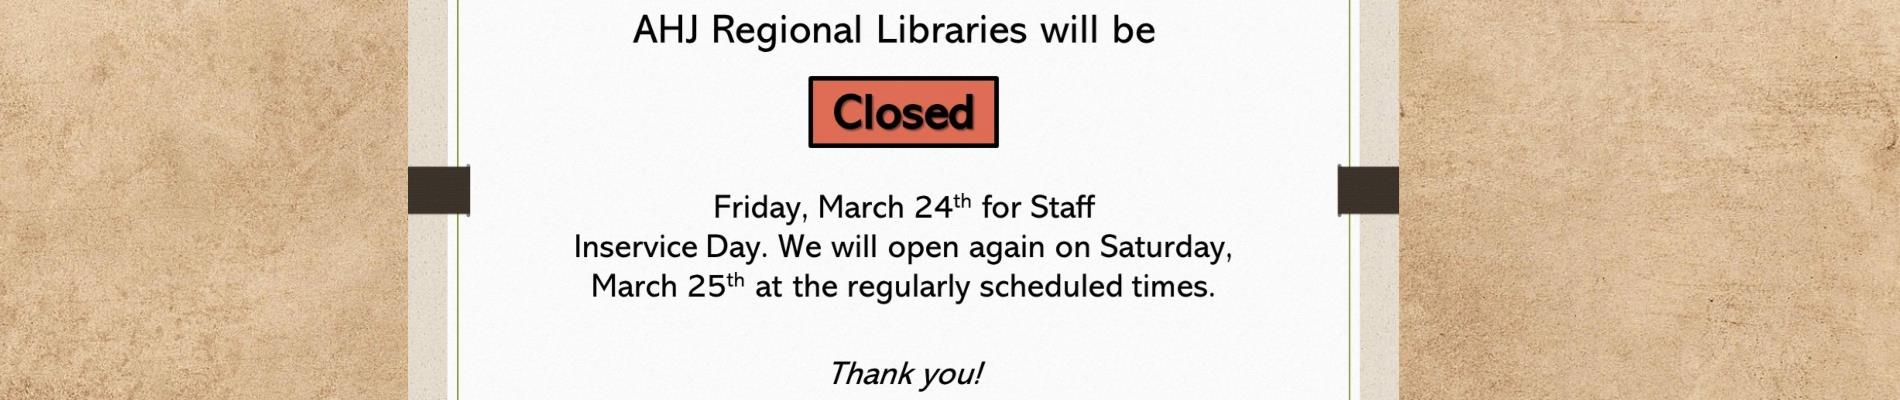 All Libraries Closed March 24th for In Service Day